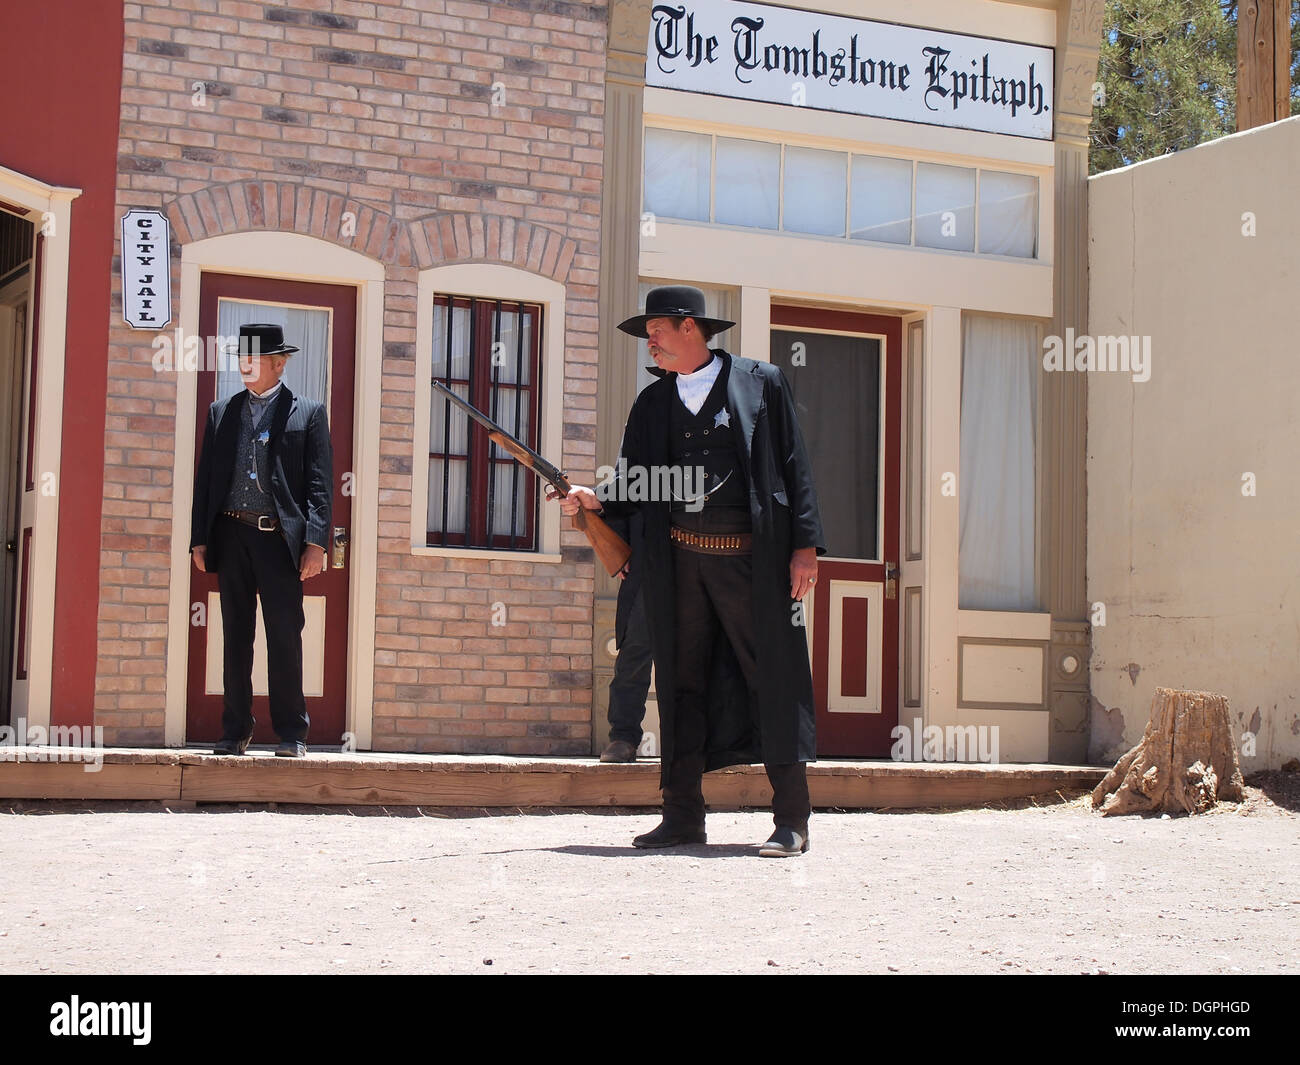 Actors portraying brothers Virgil Earp and Wyatt Earp in a recreation of Gunfight at the O.K. Corral in Tombstone, Arizona, USA Stock Photo